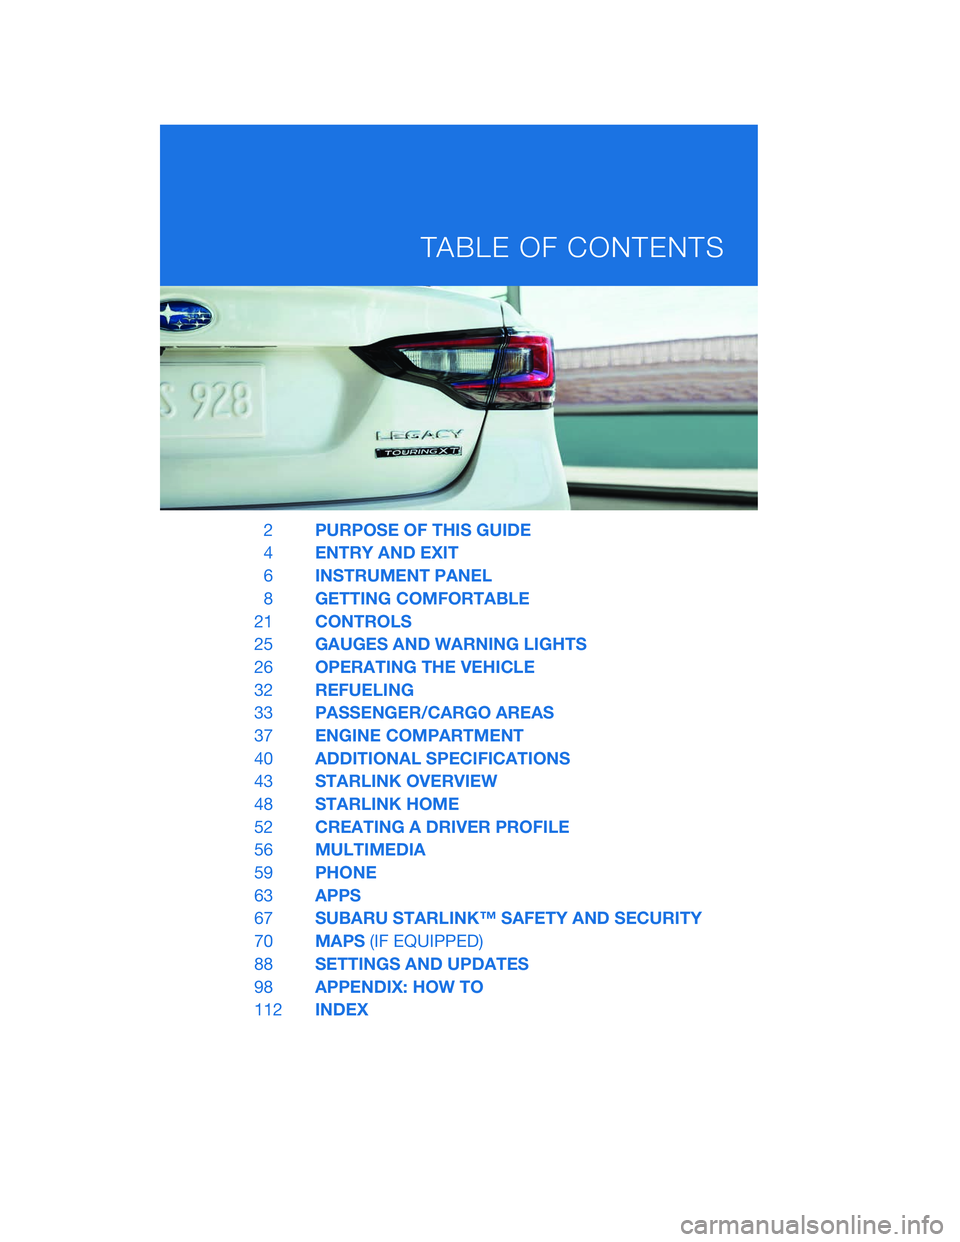 SUBARU LEGACY 2020  Getting Started Guide 2PURPOSE OF THIS GUIDE
4 ENTRY AND EXIT
6 INSTRUMENT PANEL
8 GETTING COMFORTABLE
21 CONTROLS
25 GAUGES AND WARNING LIGHTS
26 OPERATING THE VEHICLE
32 REFUELING
33 PASSENGER/CARGO AREAS
37 ENGINE COMPA